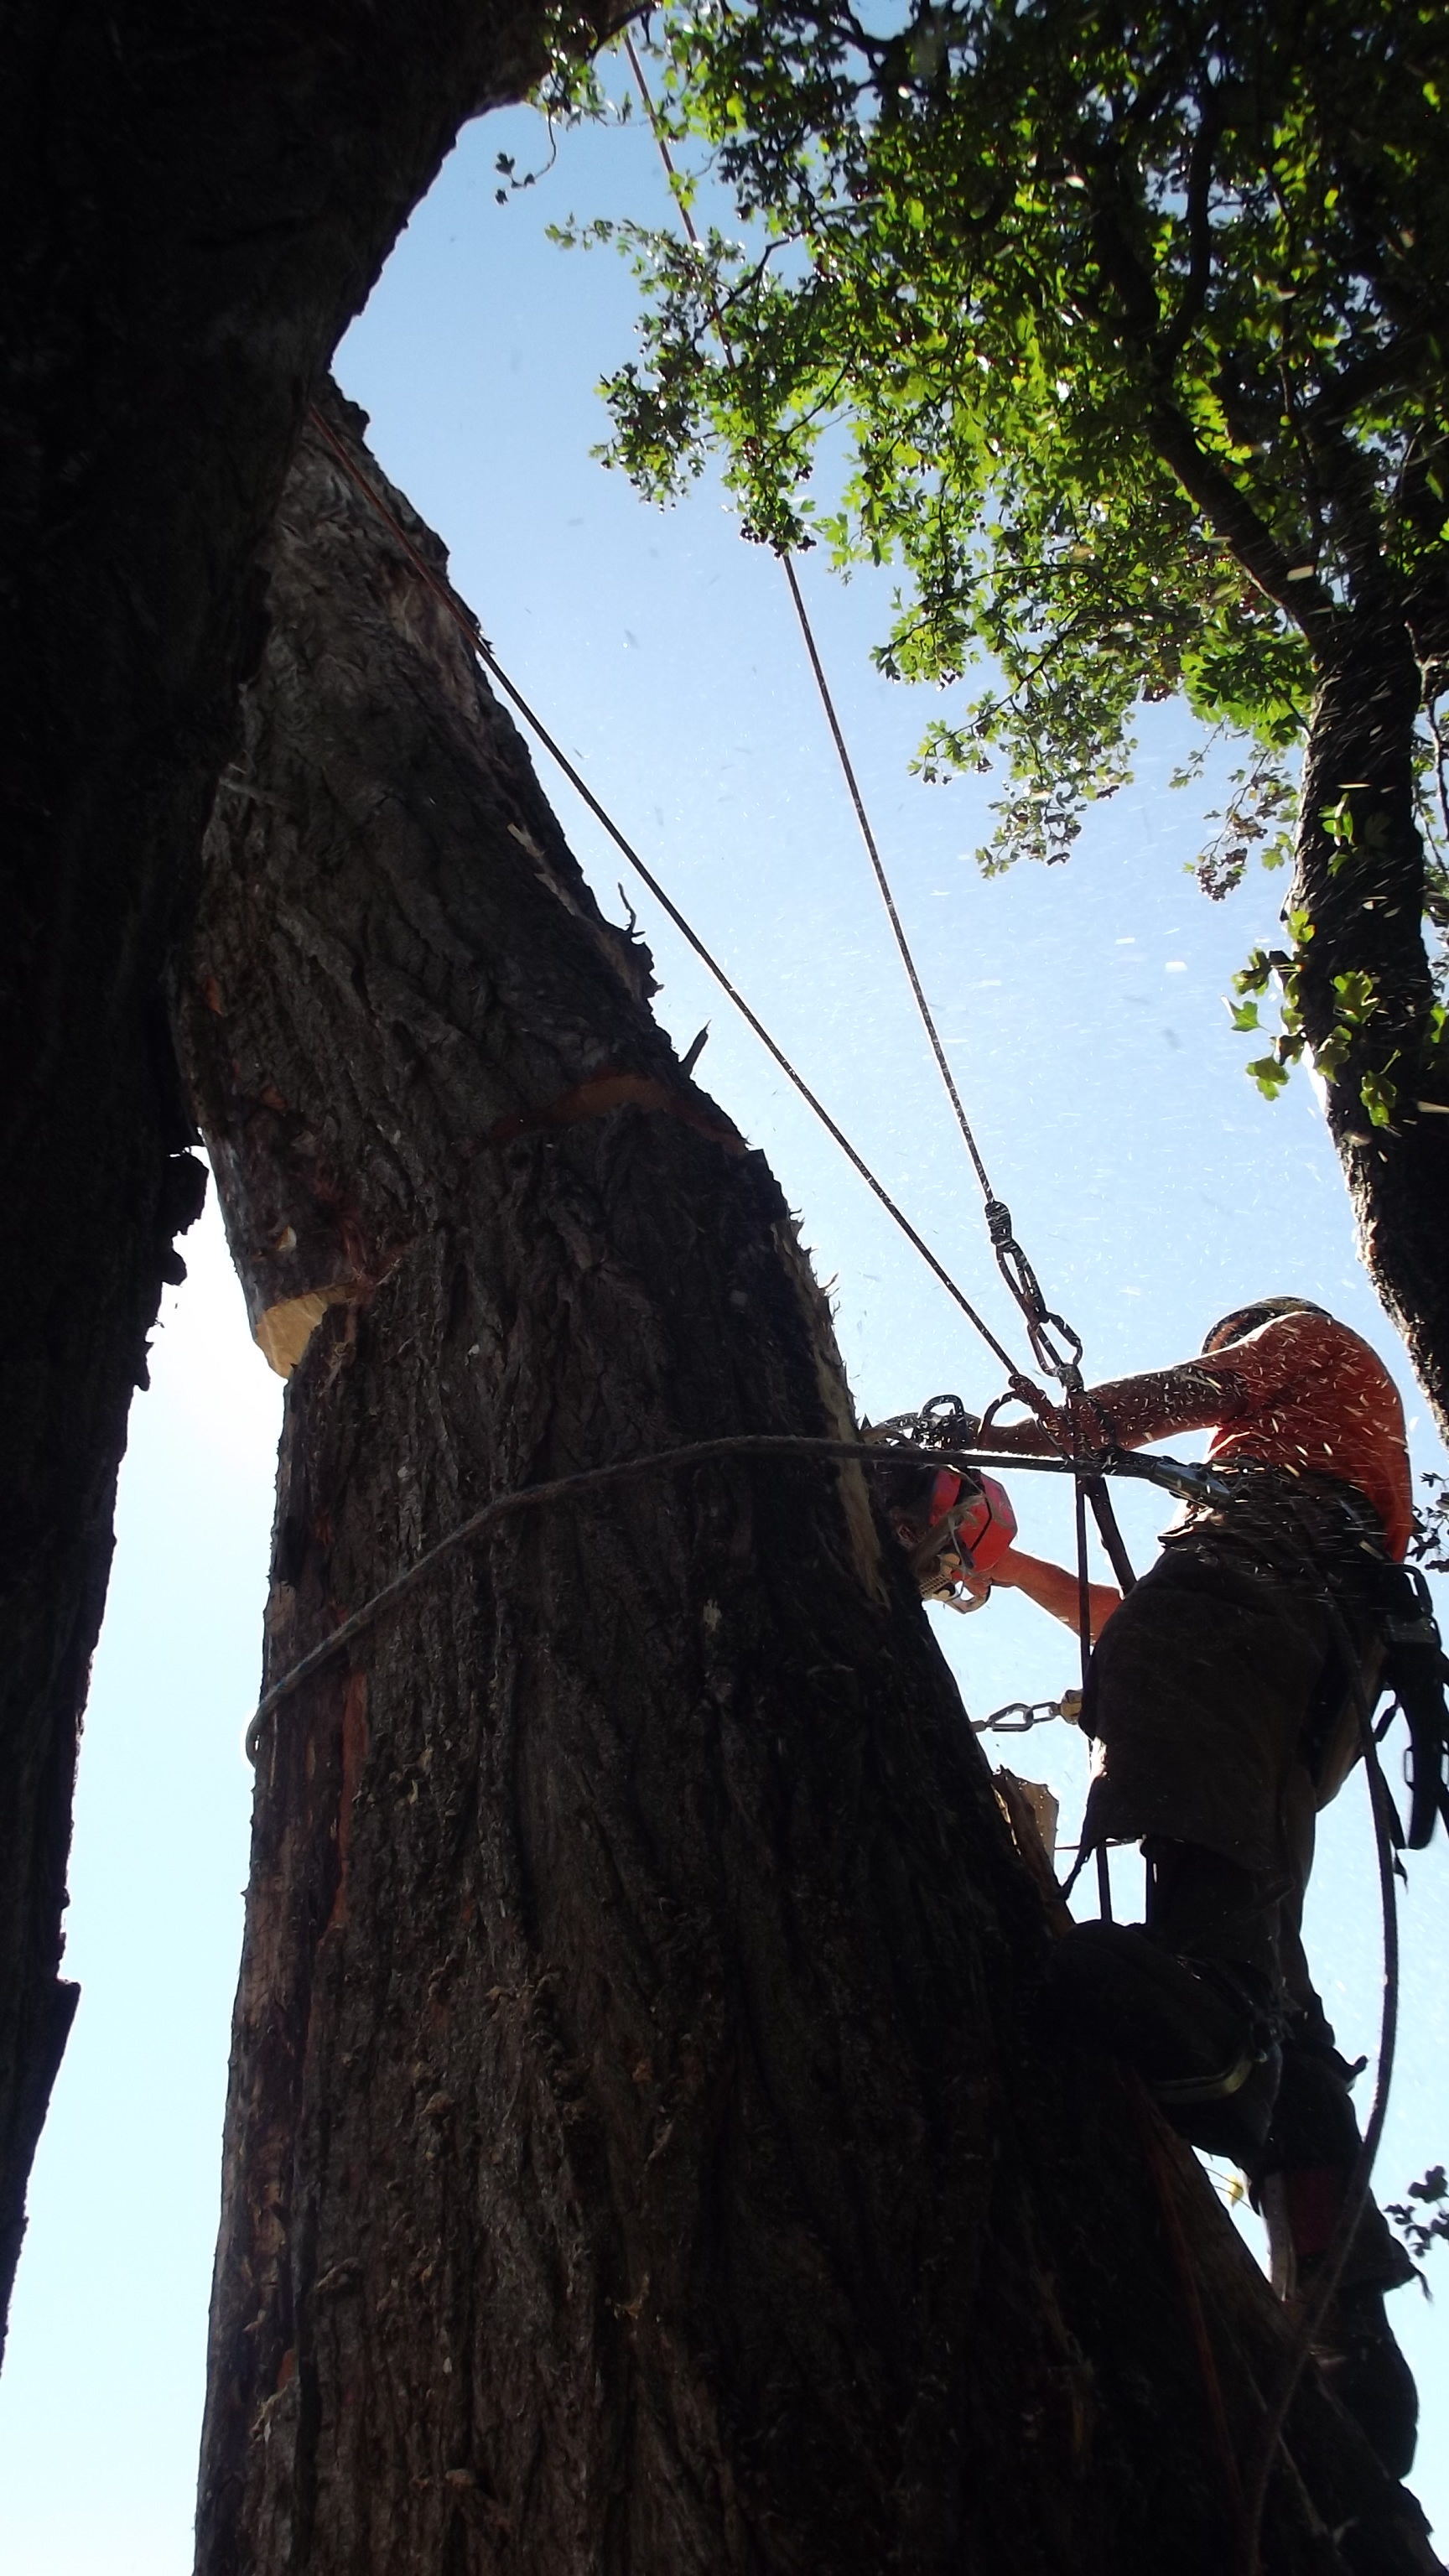 Dying Lombardy Poplar Removal